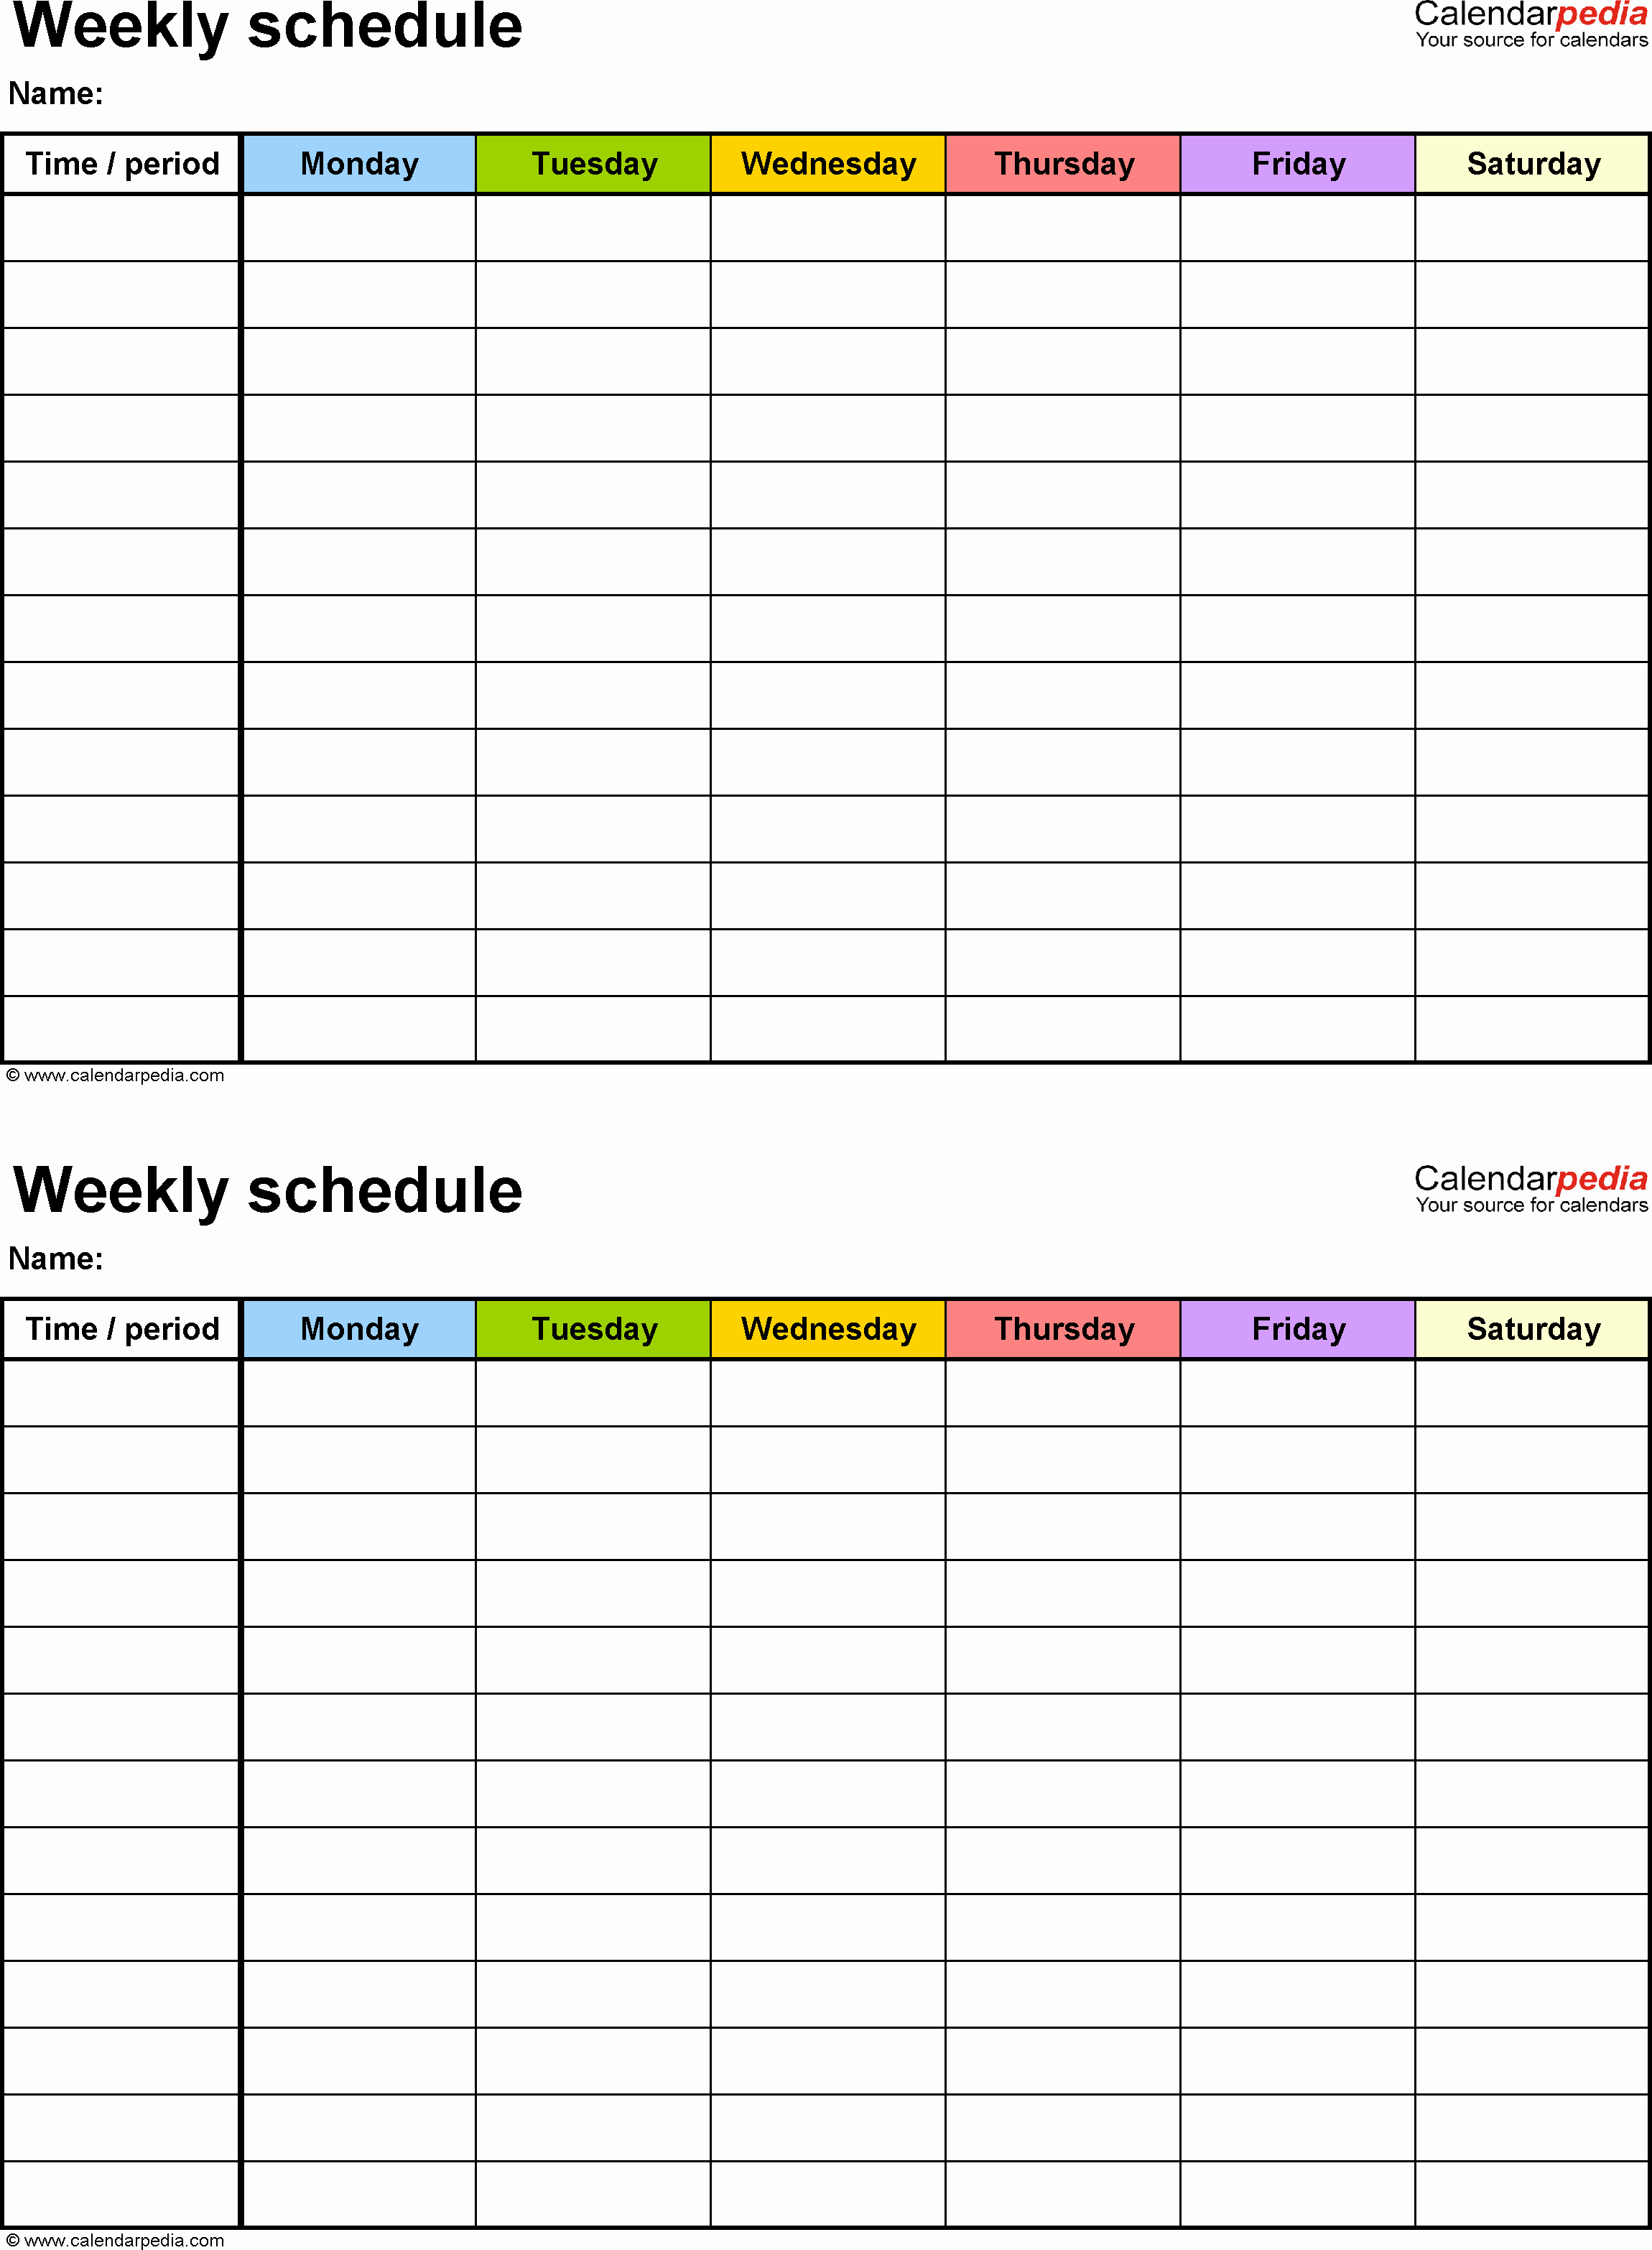 5 Year Maintenance Plan Template Lovely Weekly Schedule Template for Word Version 9 2 Schedules